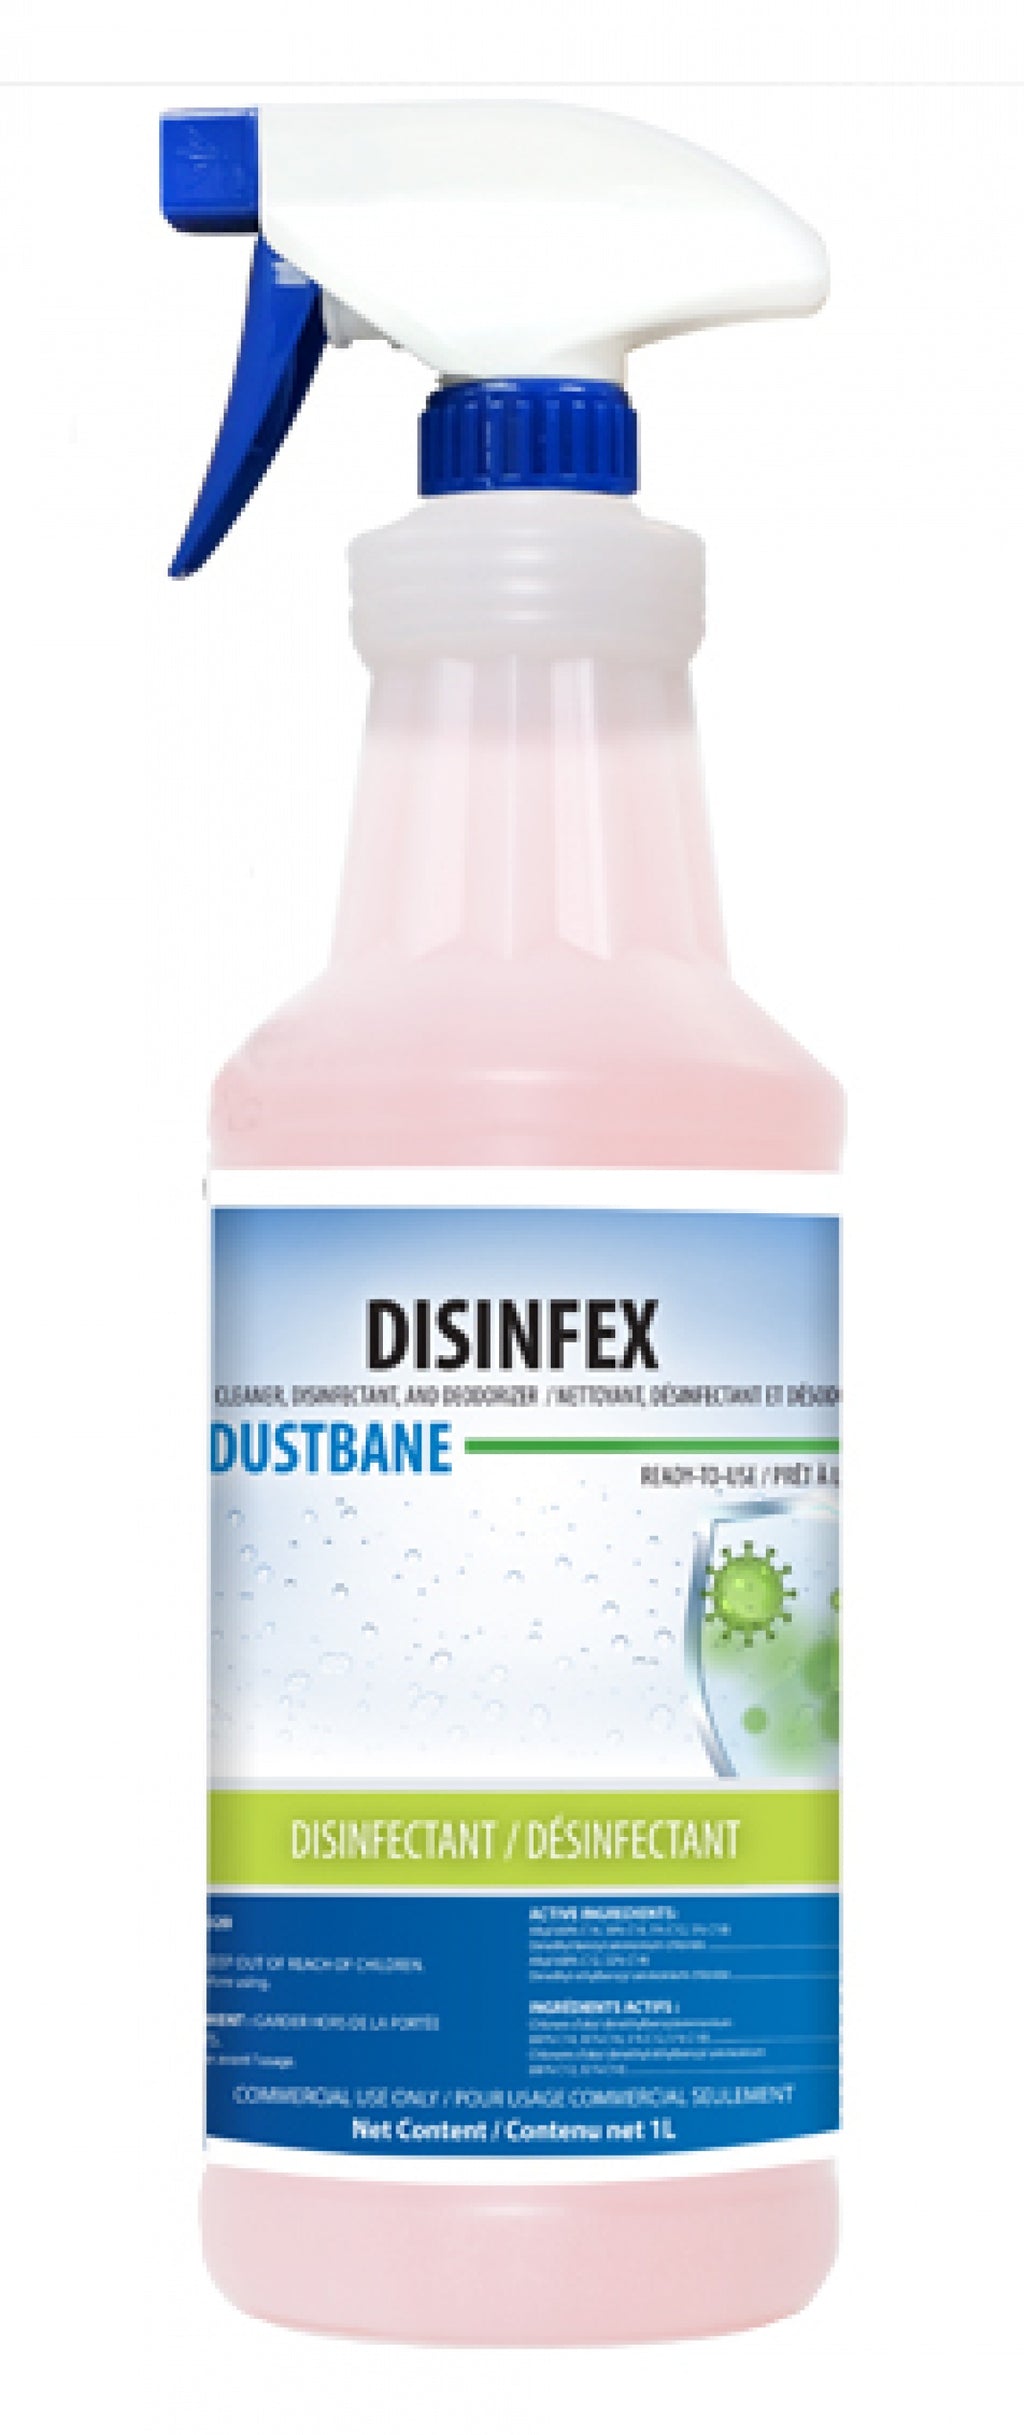 1L DUSTBANE® DISINFEX™ CLEANER, DISINFECTANT AND DEODORIZER, RTU